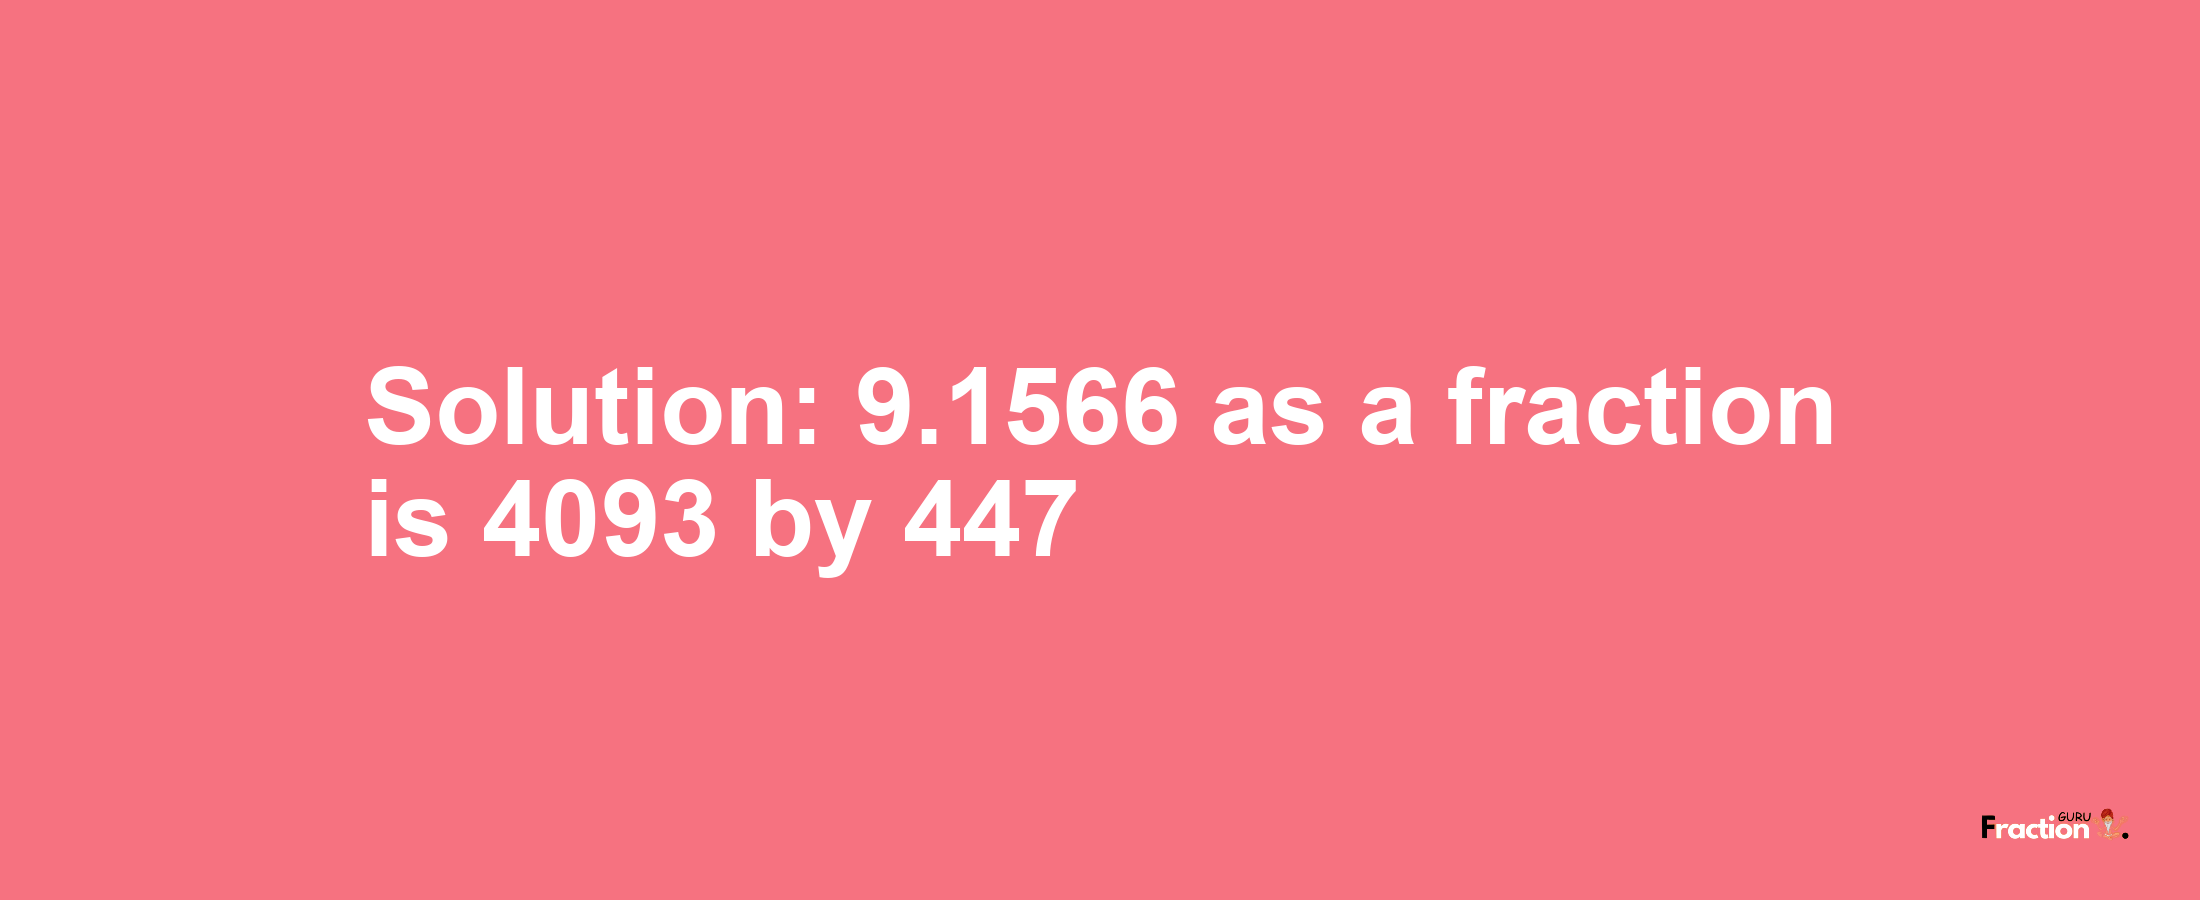 Solution:9.1566 as a fraction is 4093/447